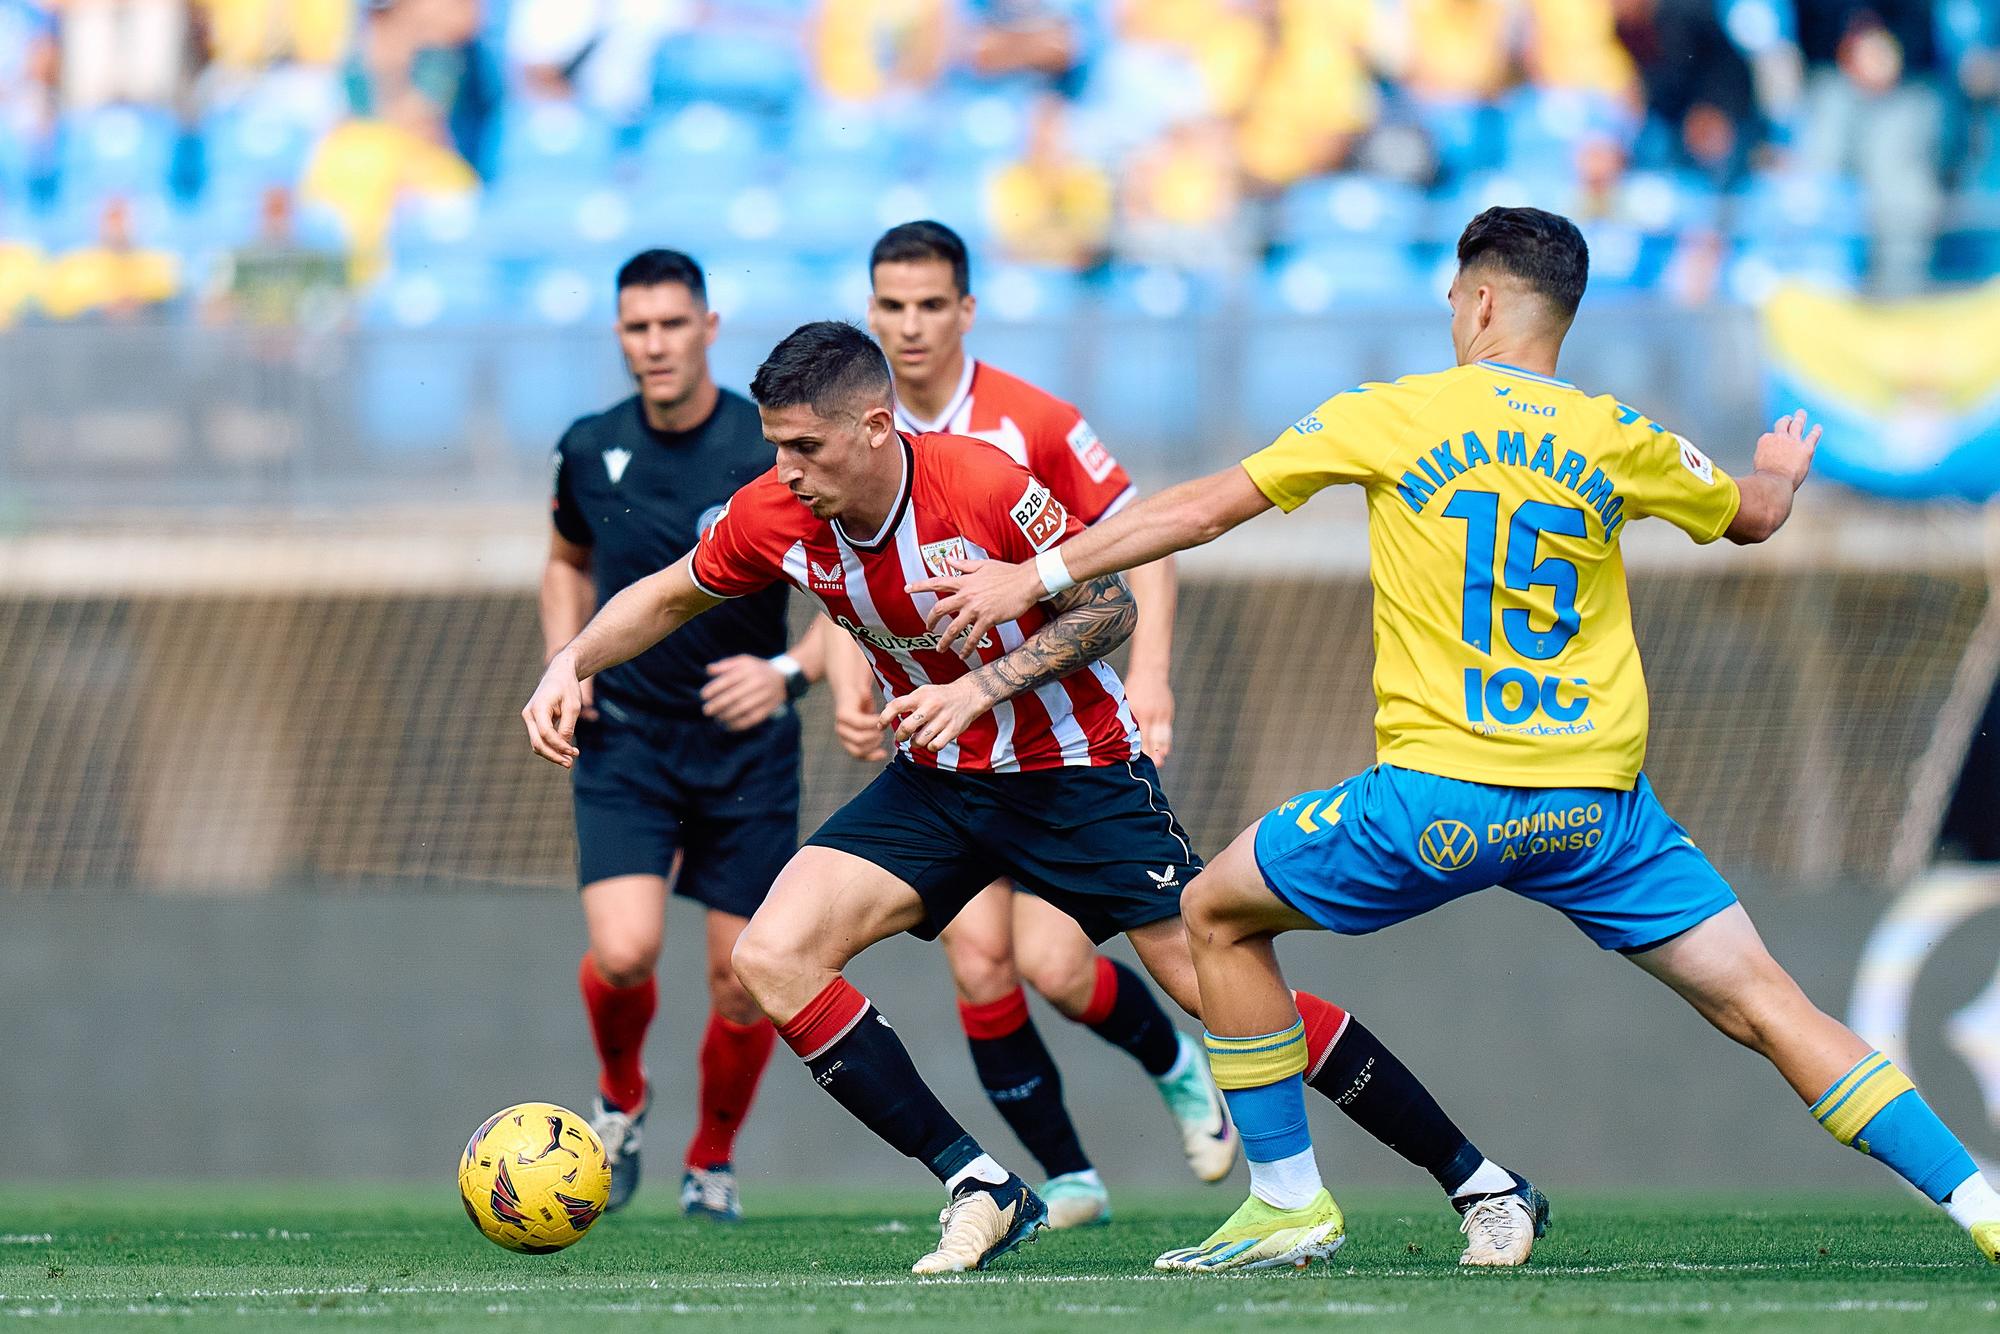 Gorka Guruzeta of Athletic Club in action competes for the ball with Mika Marmol of Las Palmas during the Spanish league, La Liga EA Sports, football match played between UD Las Palmas and Athletic Club at Estadio Gran Canaria on March 10, 2024, in Las Palmas de Gran Canaria, Spain. AFP7 10/03/2024 ONLY FOR USE IN SPAIN / Gabriel Jimenez / AFP7 / Europa Press;2024;SOCCER;Sport;ZSOCCER;ZSPORT;UD Las Palmas v Athletic Club - La Liga EA Sports;